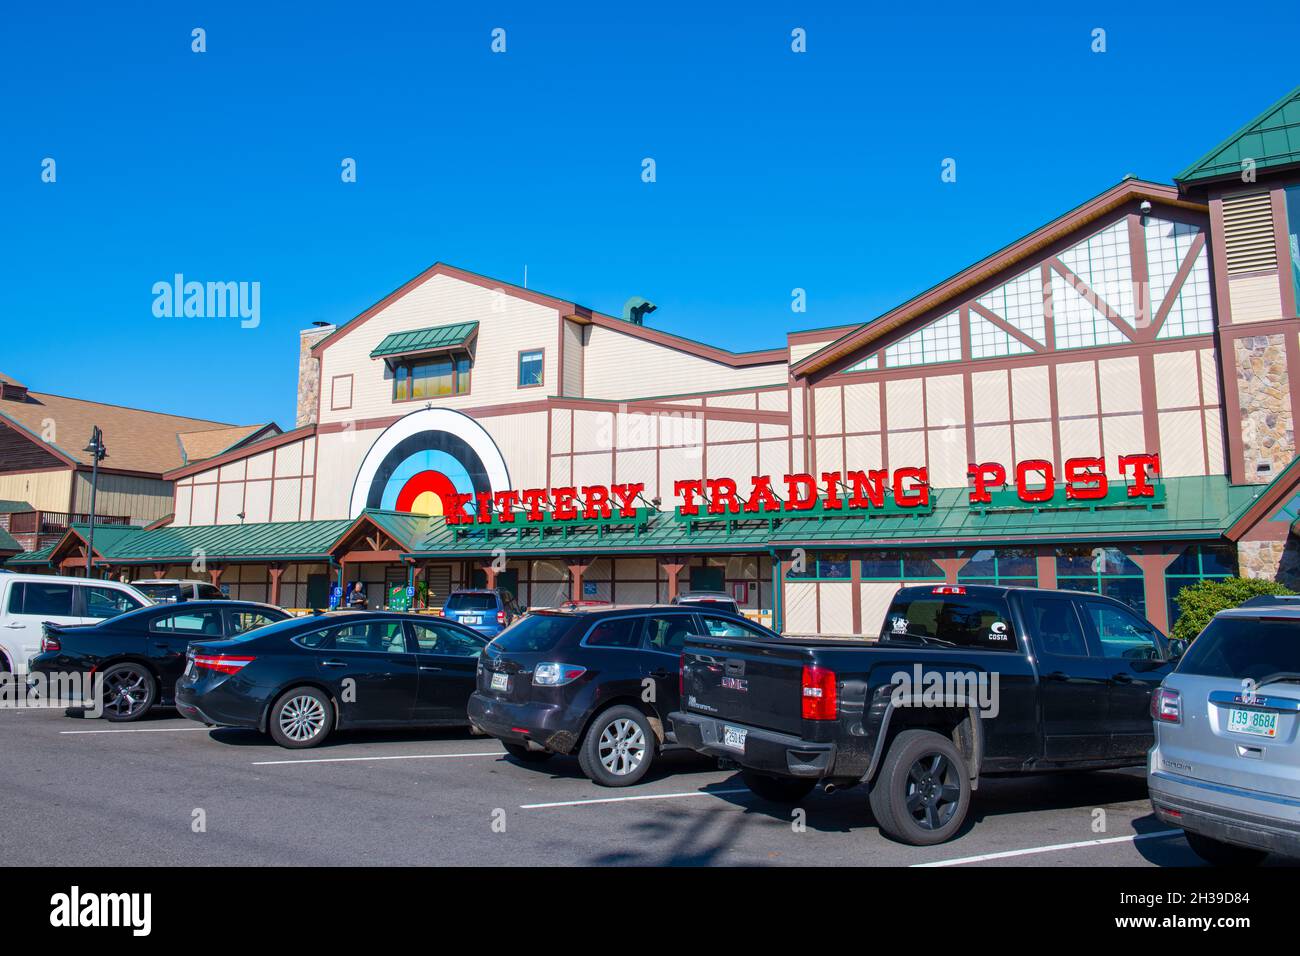 Kittery Trading Post on 301 US Route 1 in town of Kittery, Maine ME, USA. Stock Photo